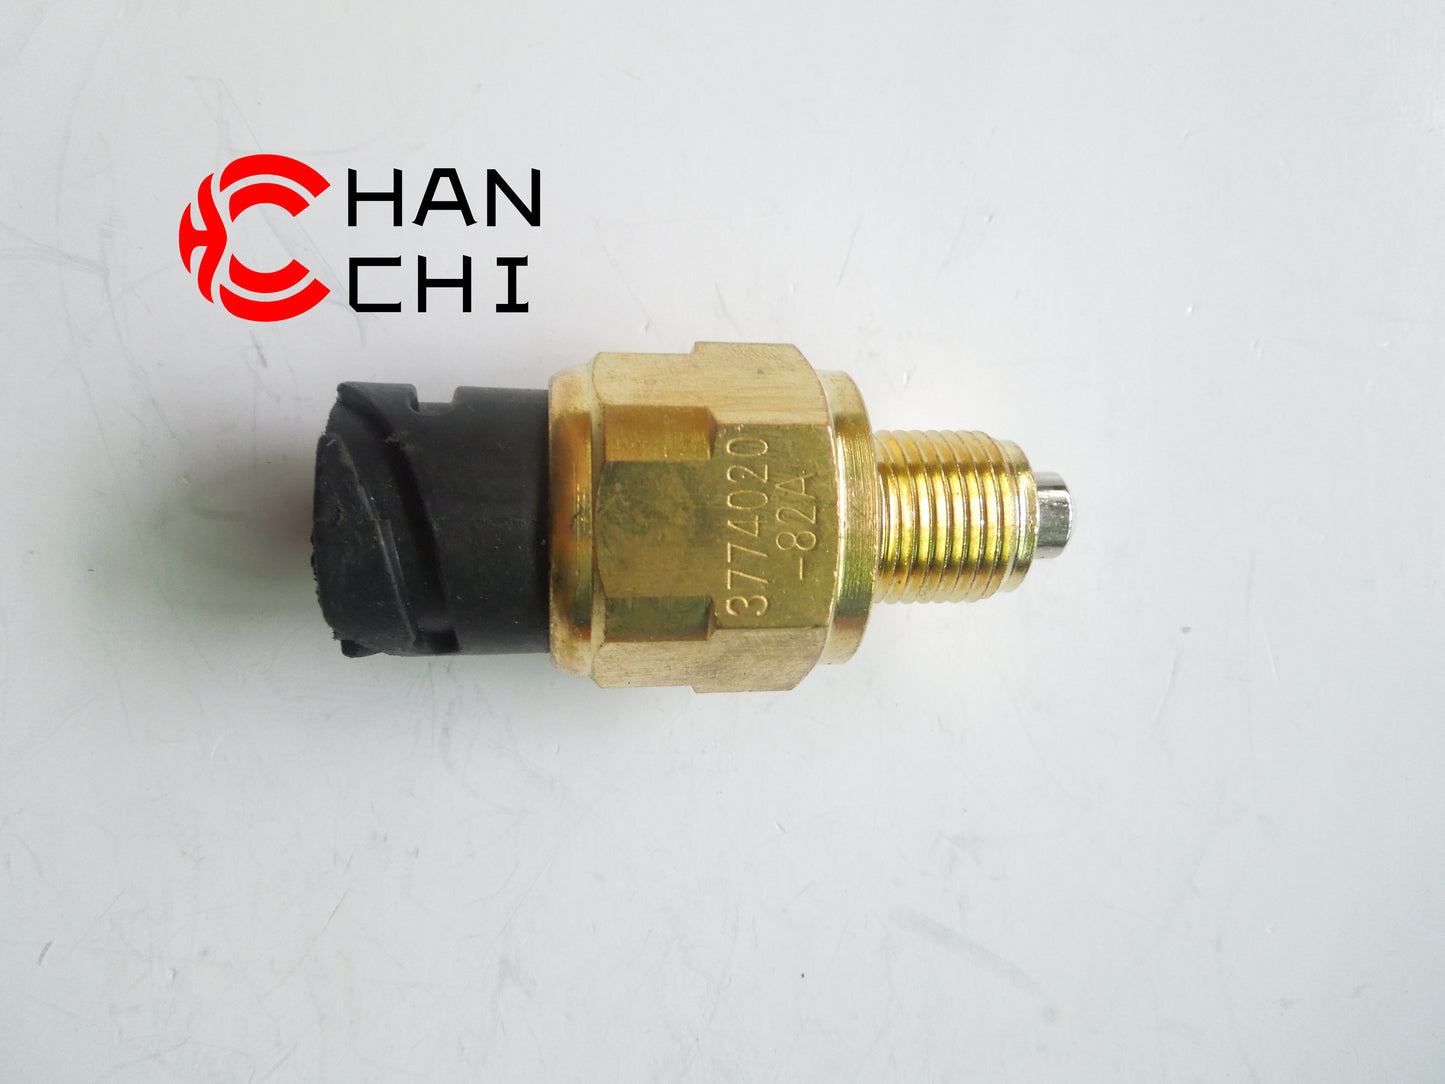 OEM: 3774020-82AMaterial: metalColor: black goldenOrigin: Made in ChinaWeight: 50gPacking List: 1* Reversing Light Switch More Service We can provide OEM Manufacturing service We can Be your one-step solution for Auto Parts We can provide technical scheme for you Feel Free to Contact Us, We will get back to you as soon as possible.